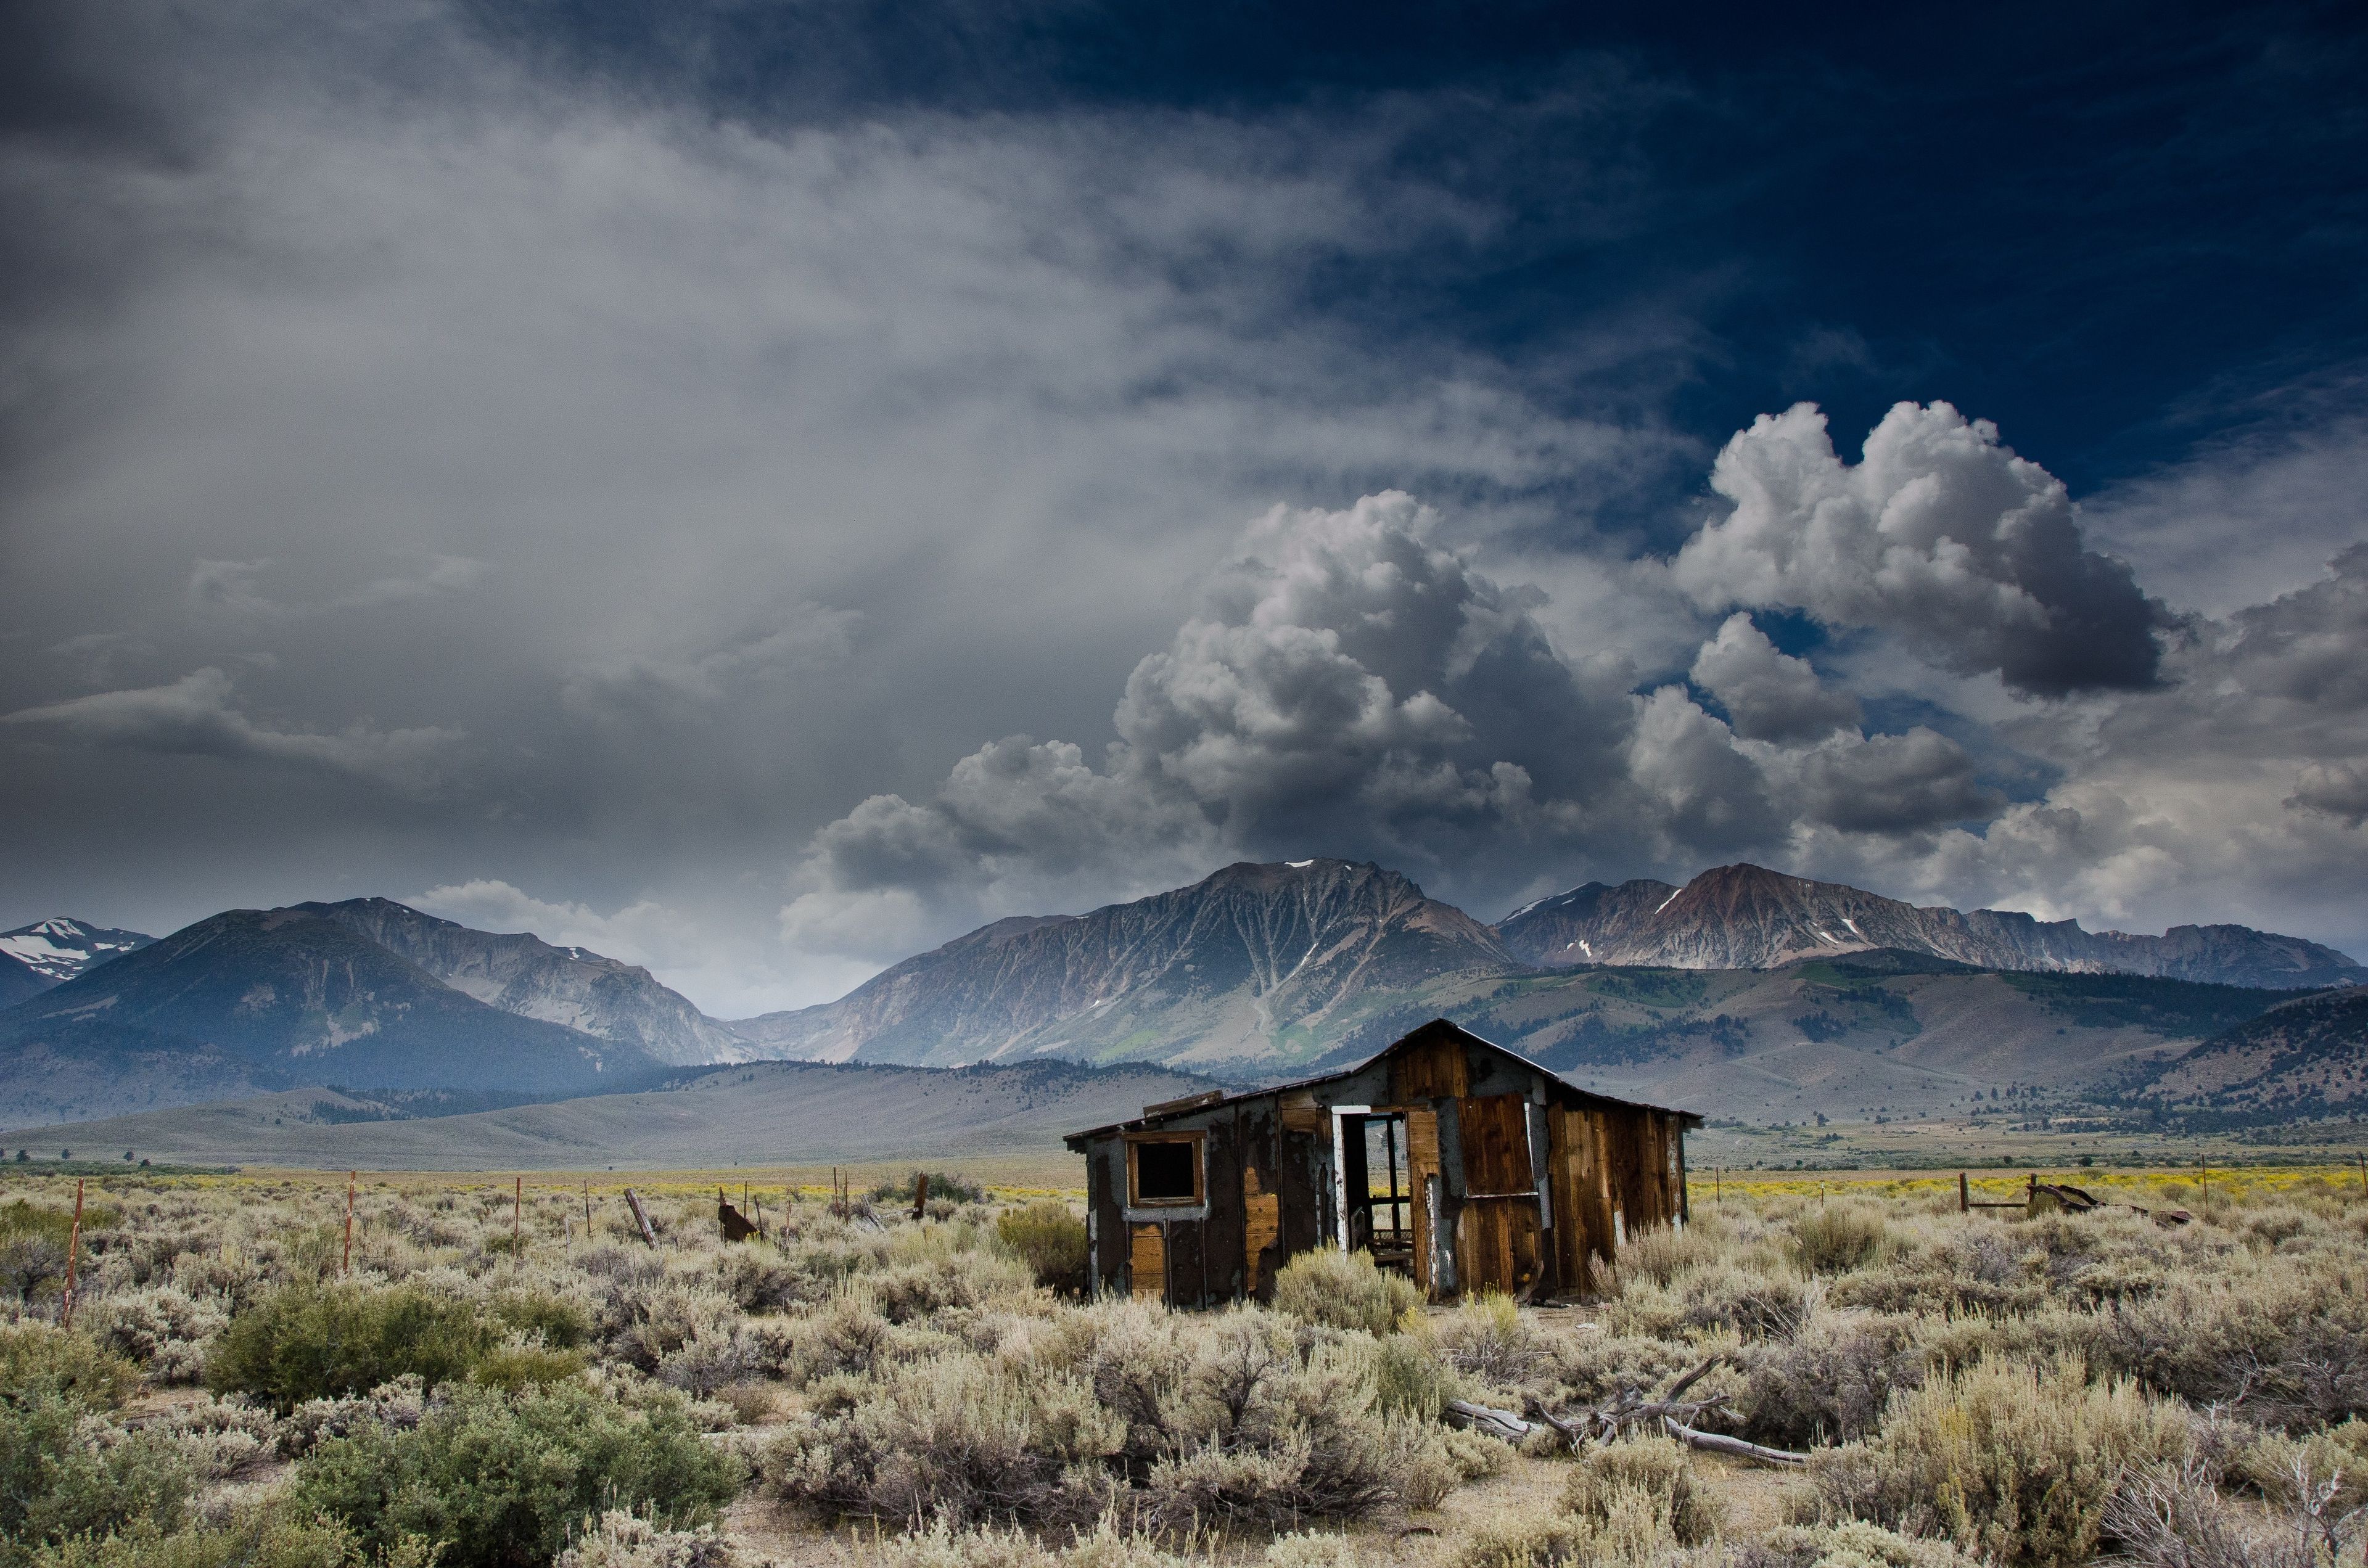 A run-down cabin in a field, with a mountain range in the background.